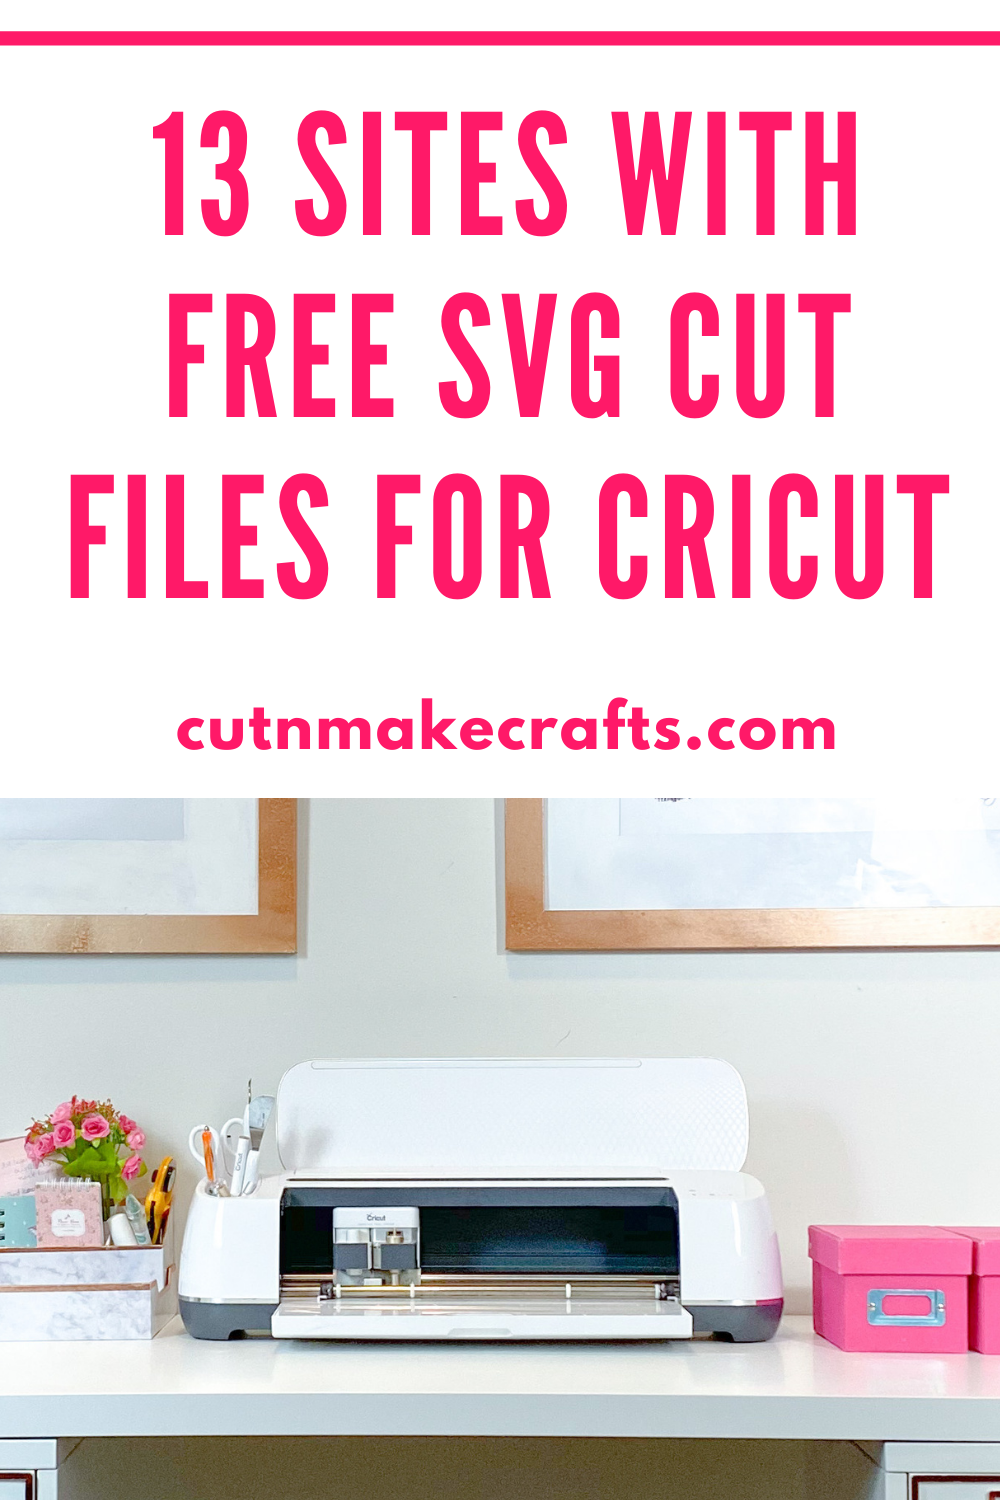 Download 13 Sites With Free Svg Cut Files For Cricut Cut N Make Crafts